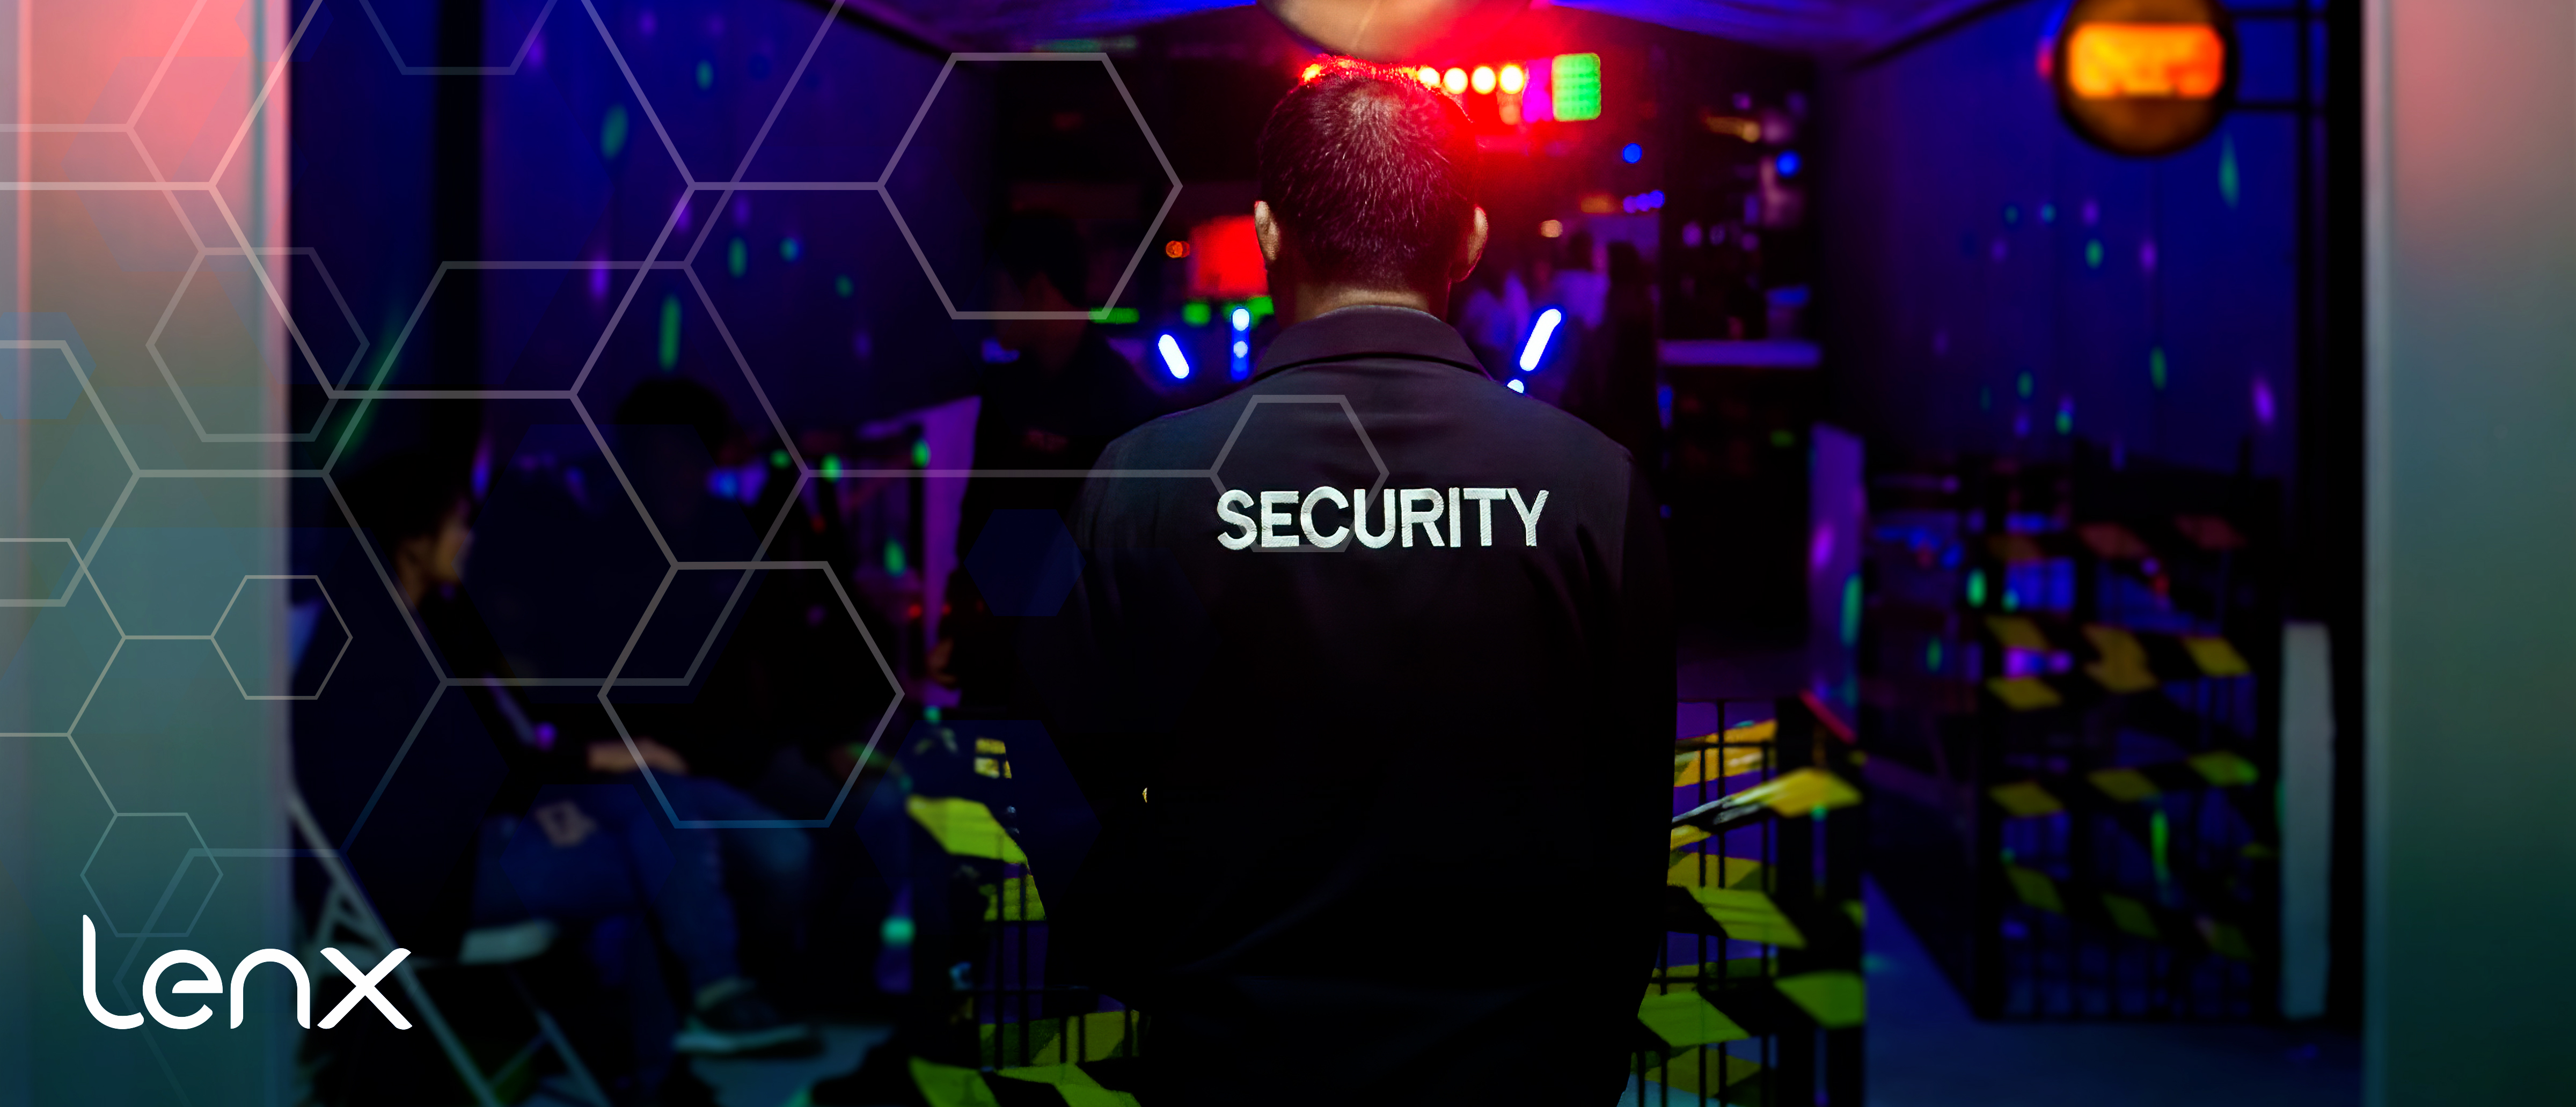 Freeing Up Security Personnel For Other Duties Using AI Security, Active Shooter Detection Systems